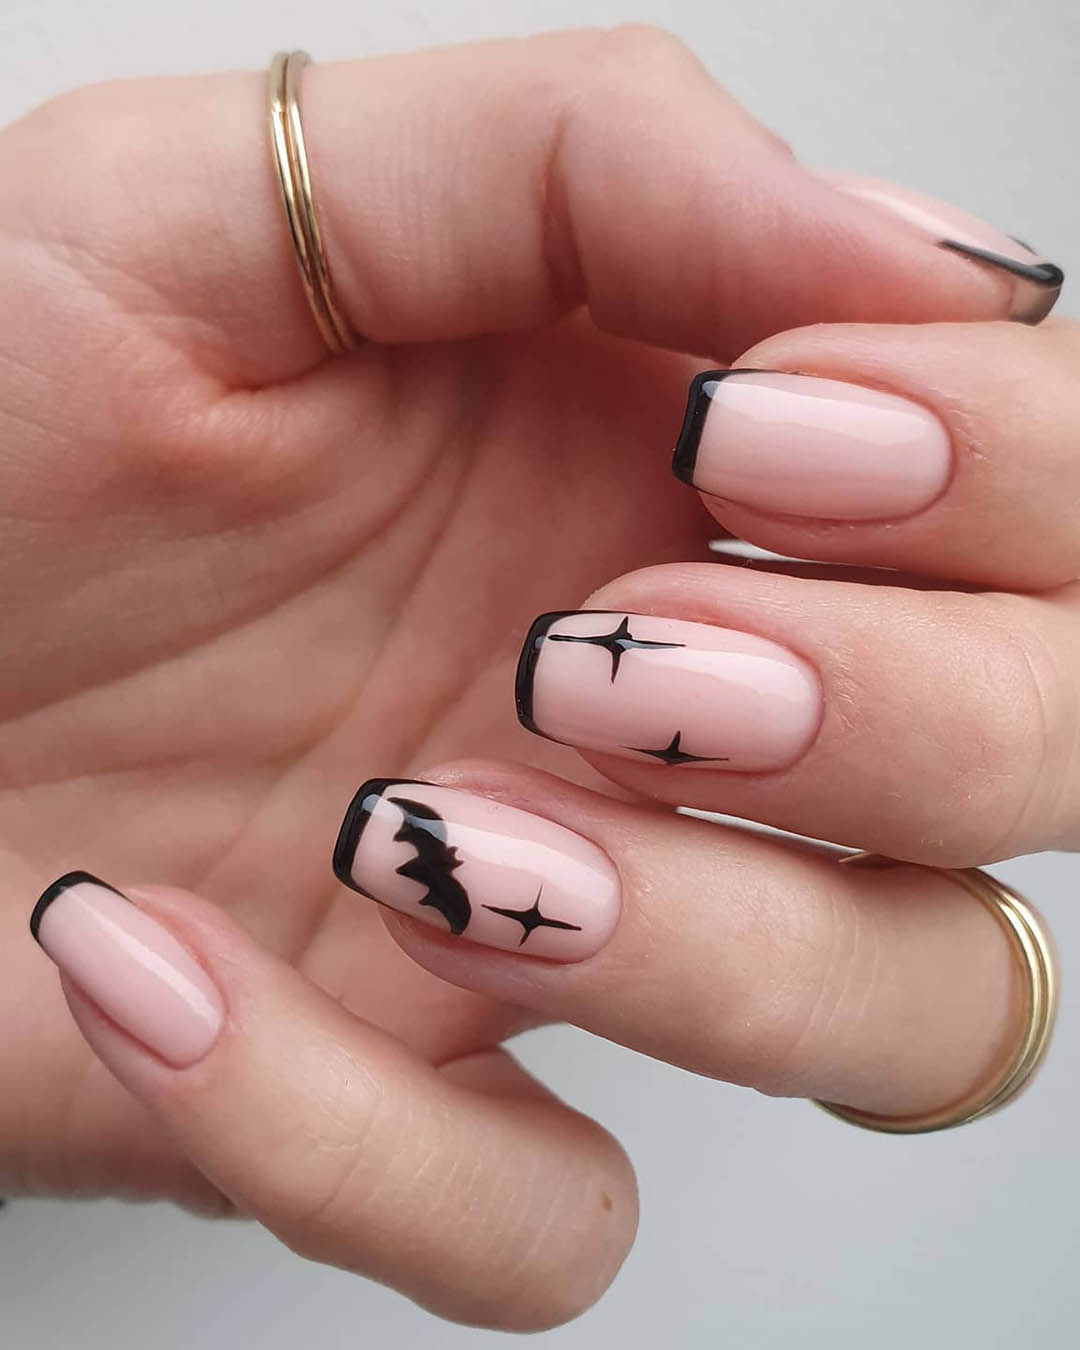 black wedding nails halloween french tip and bat thehotblend